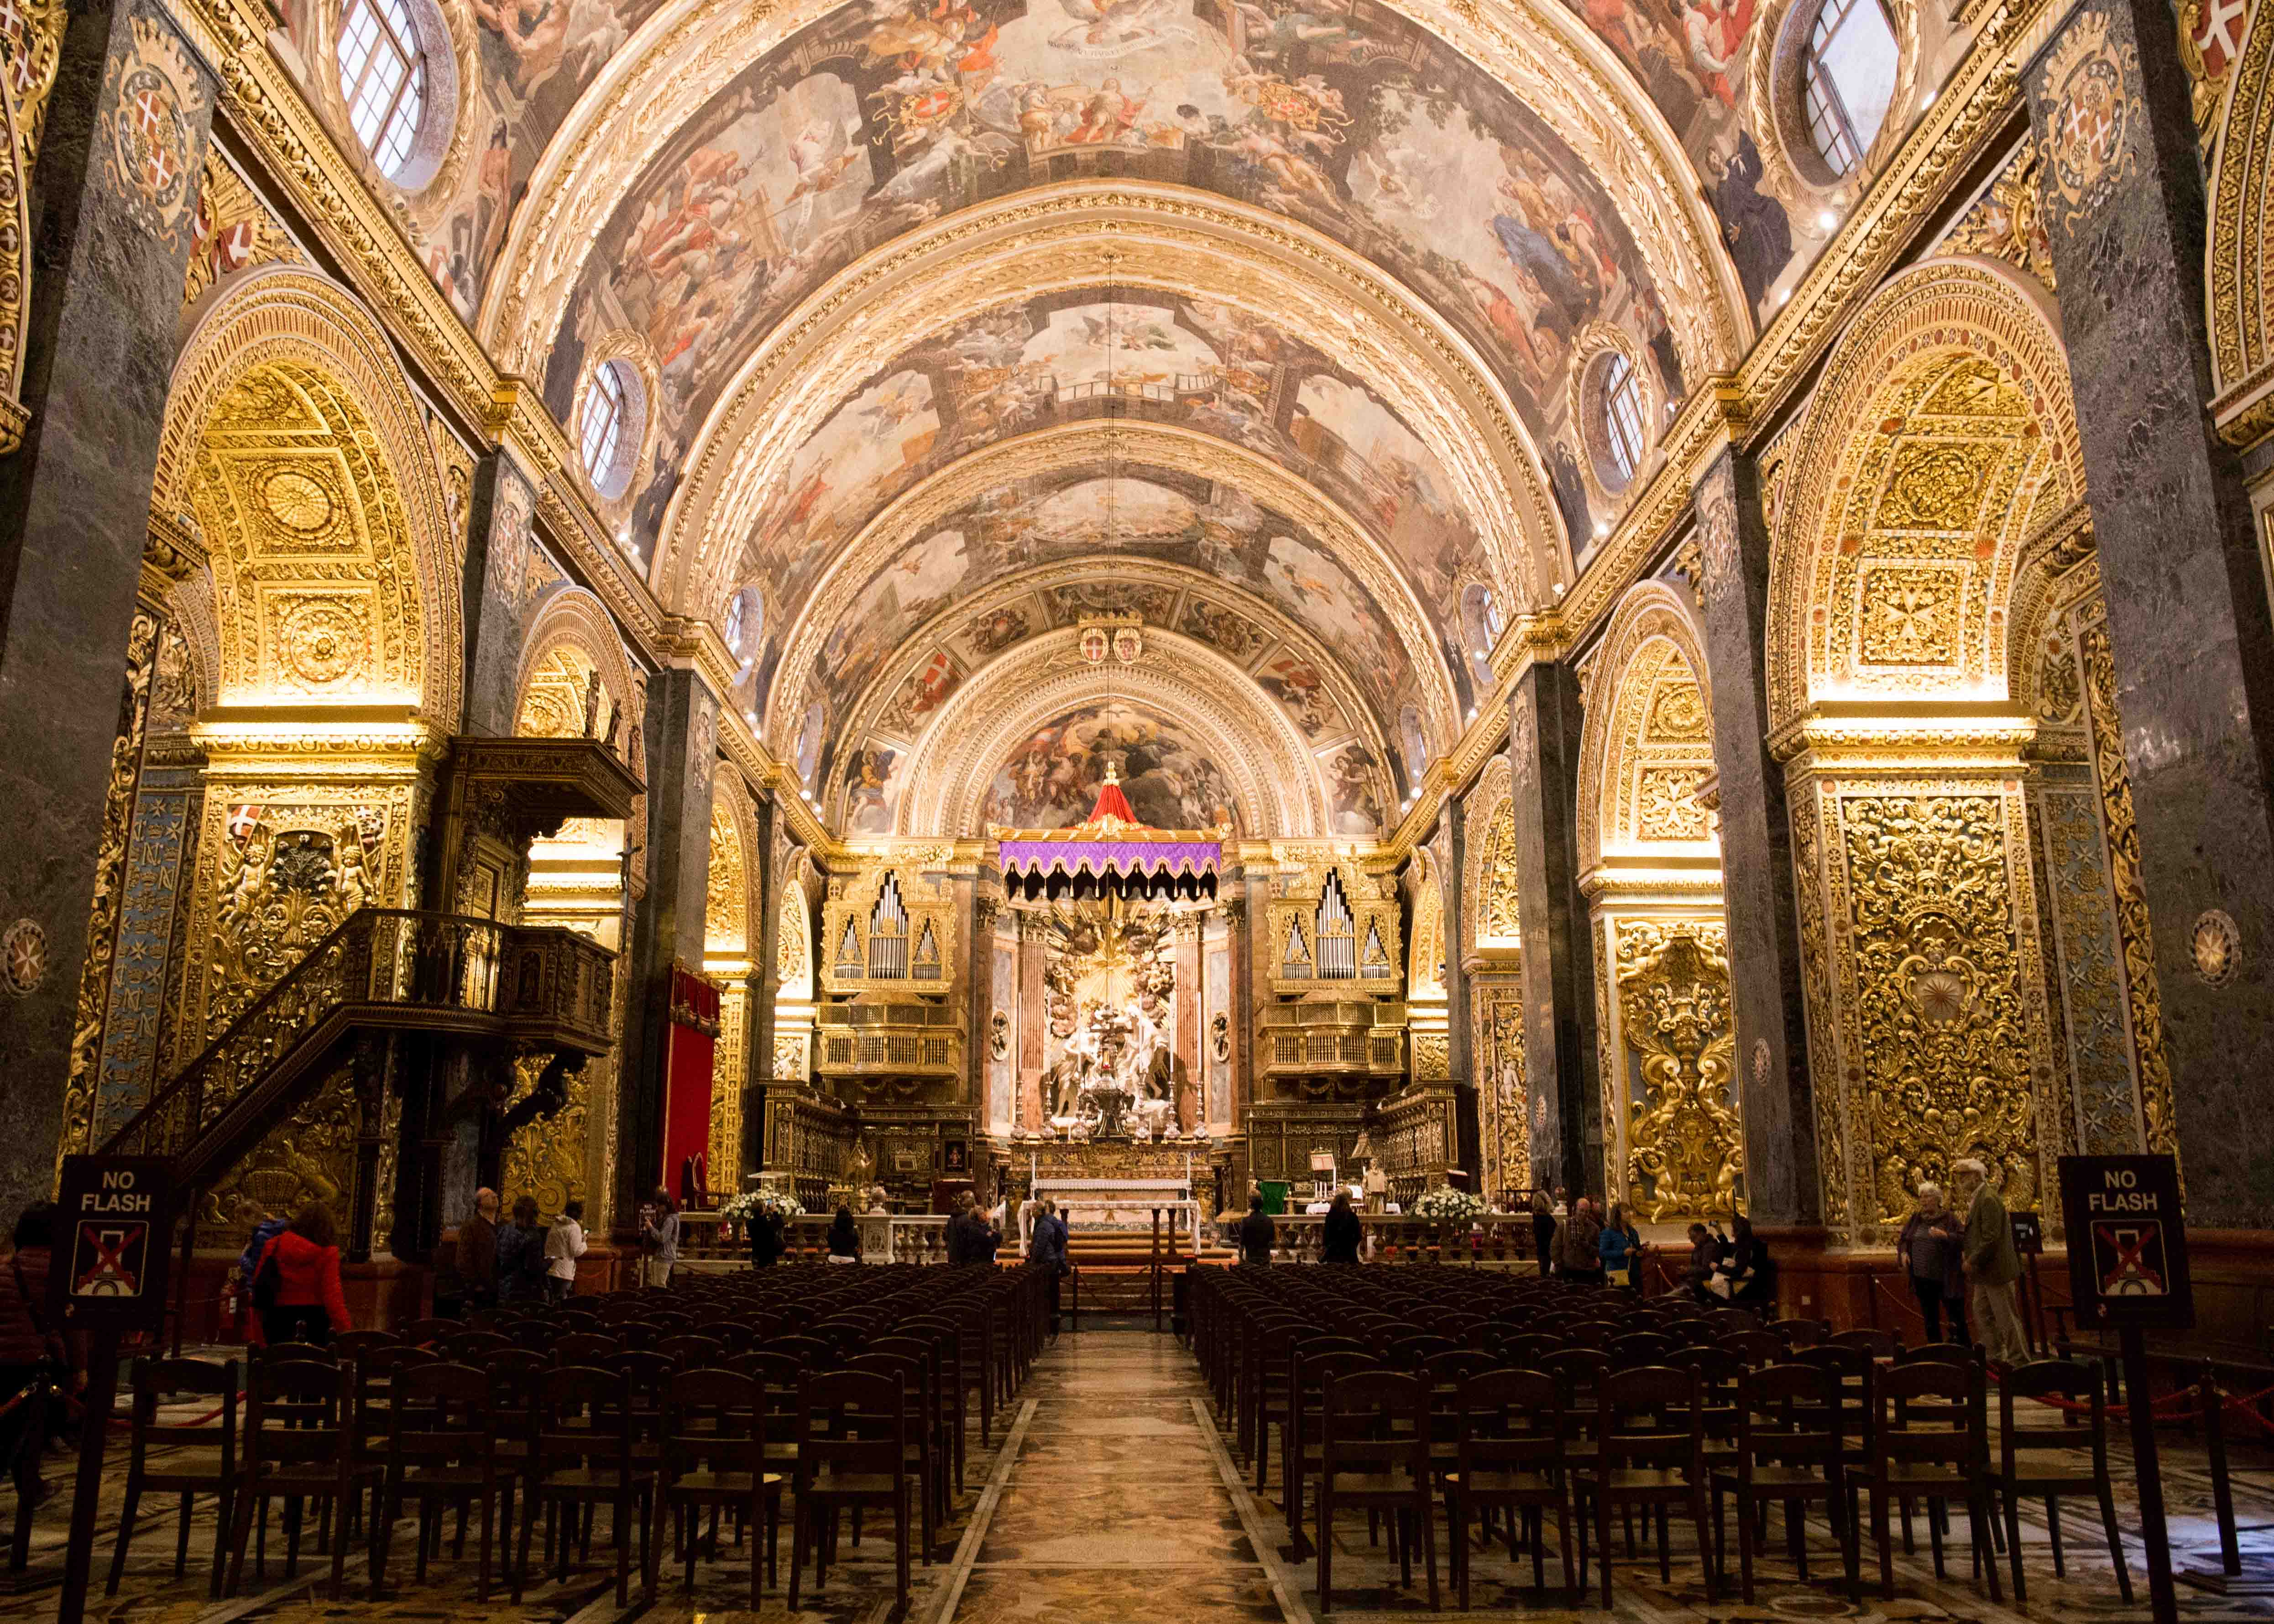 Where to visit in Valletta? St. John's Co-Cathedral